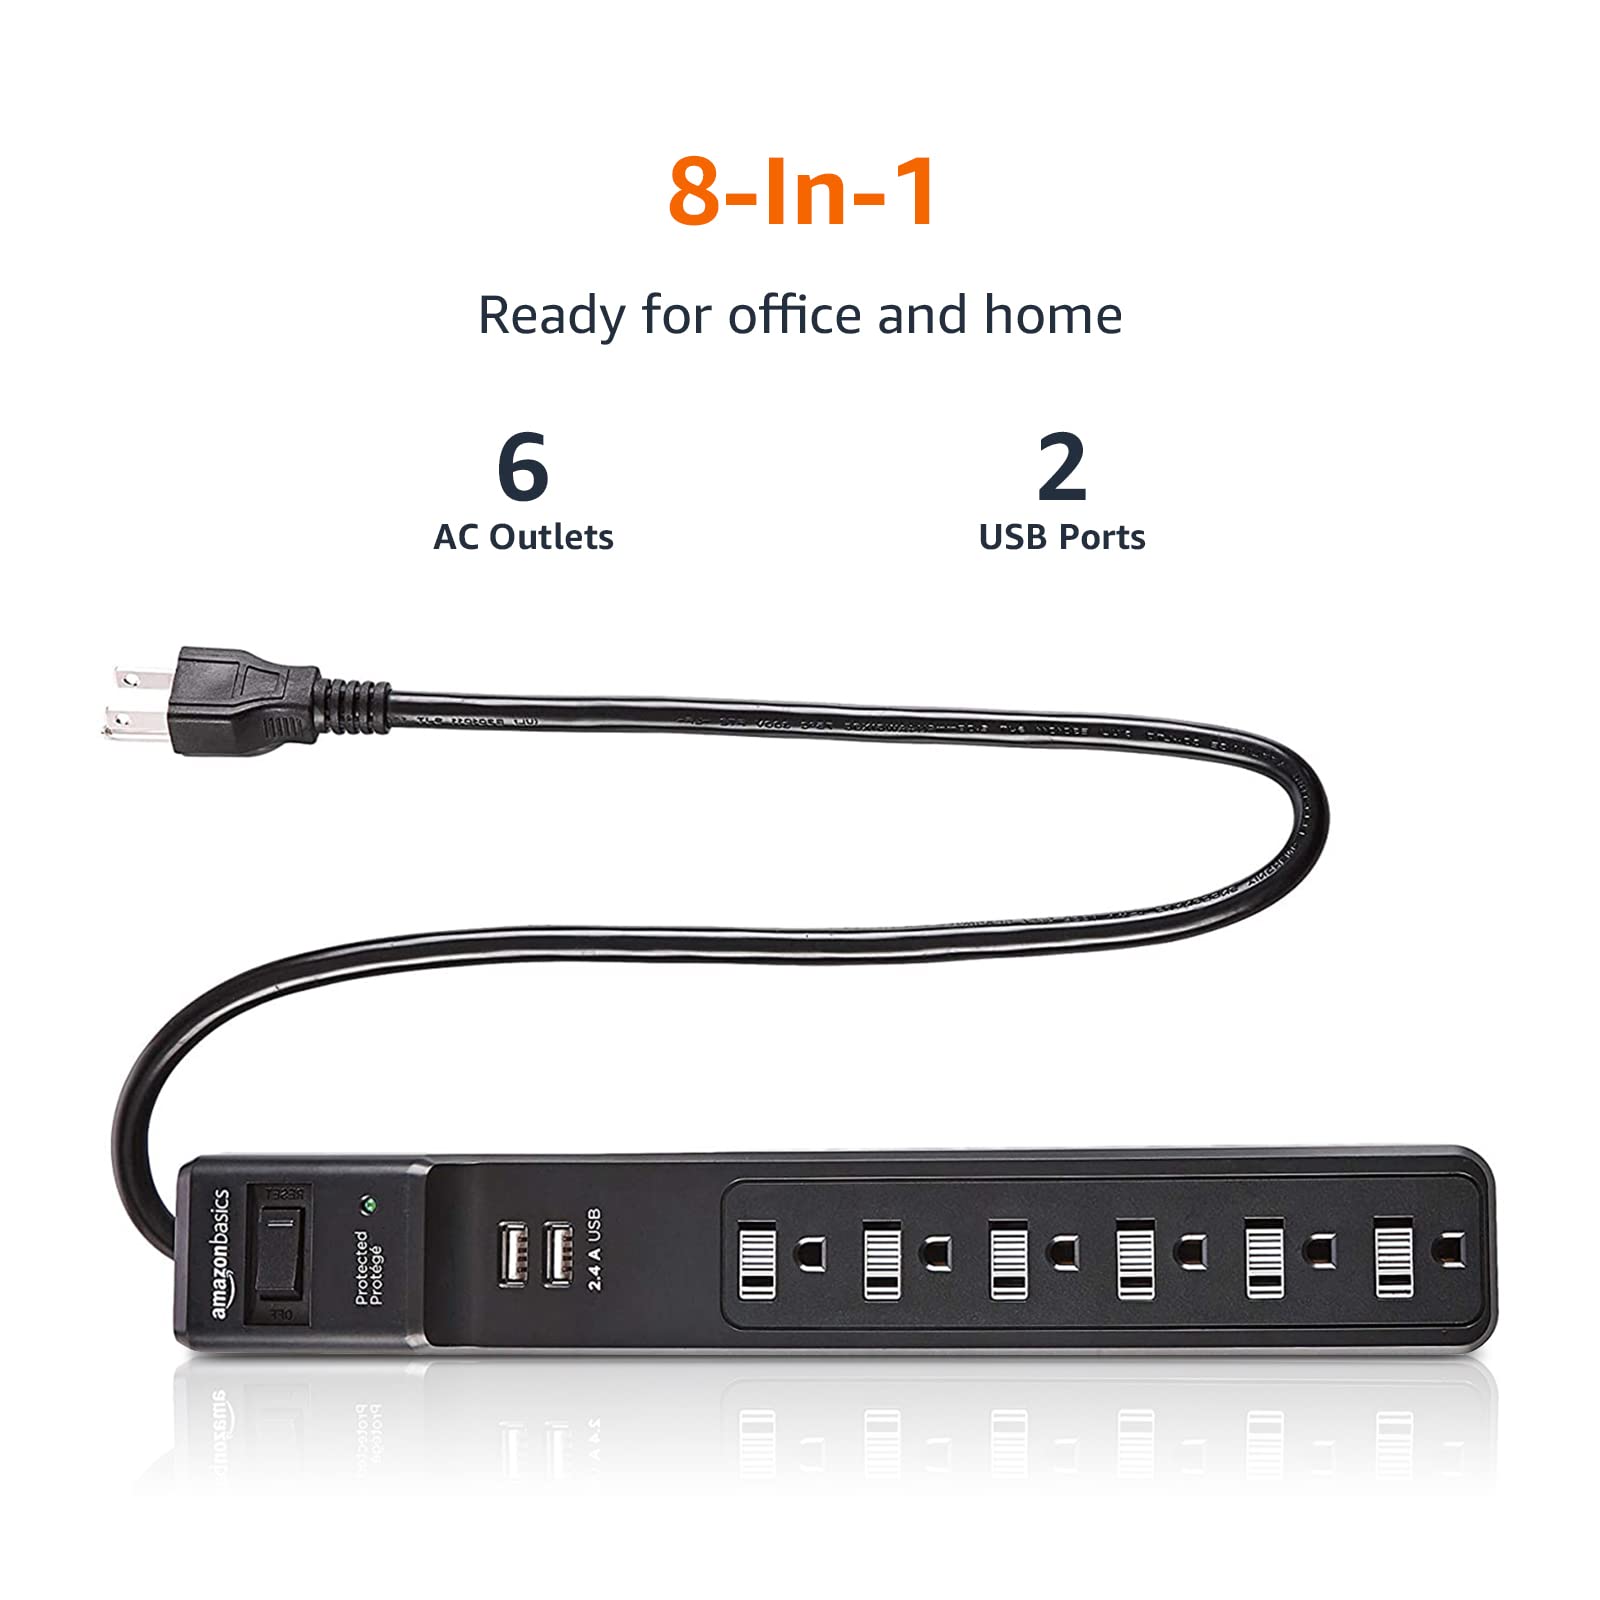 Amazon Basics 6-Outlet Surge Protector Power Strip, 2 USB Ports, 2 Ft Cord - 500 Joule, Black, 2-Pack